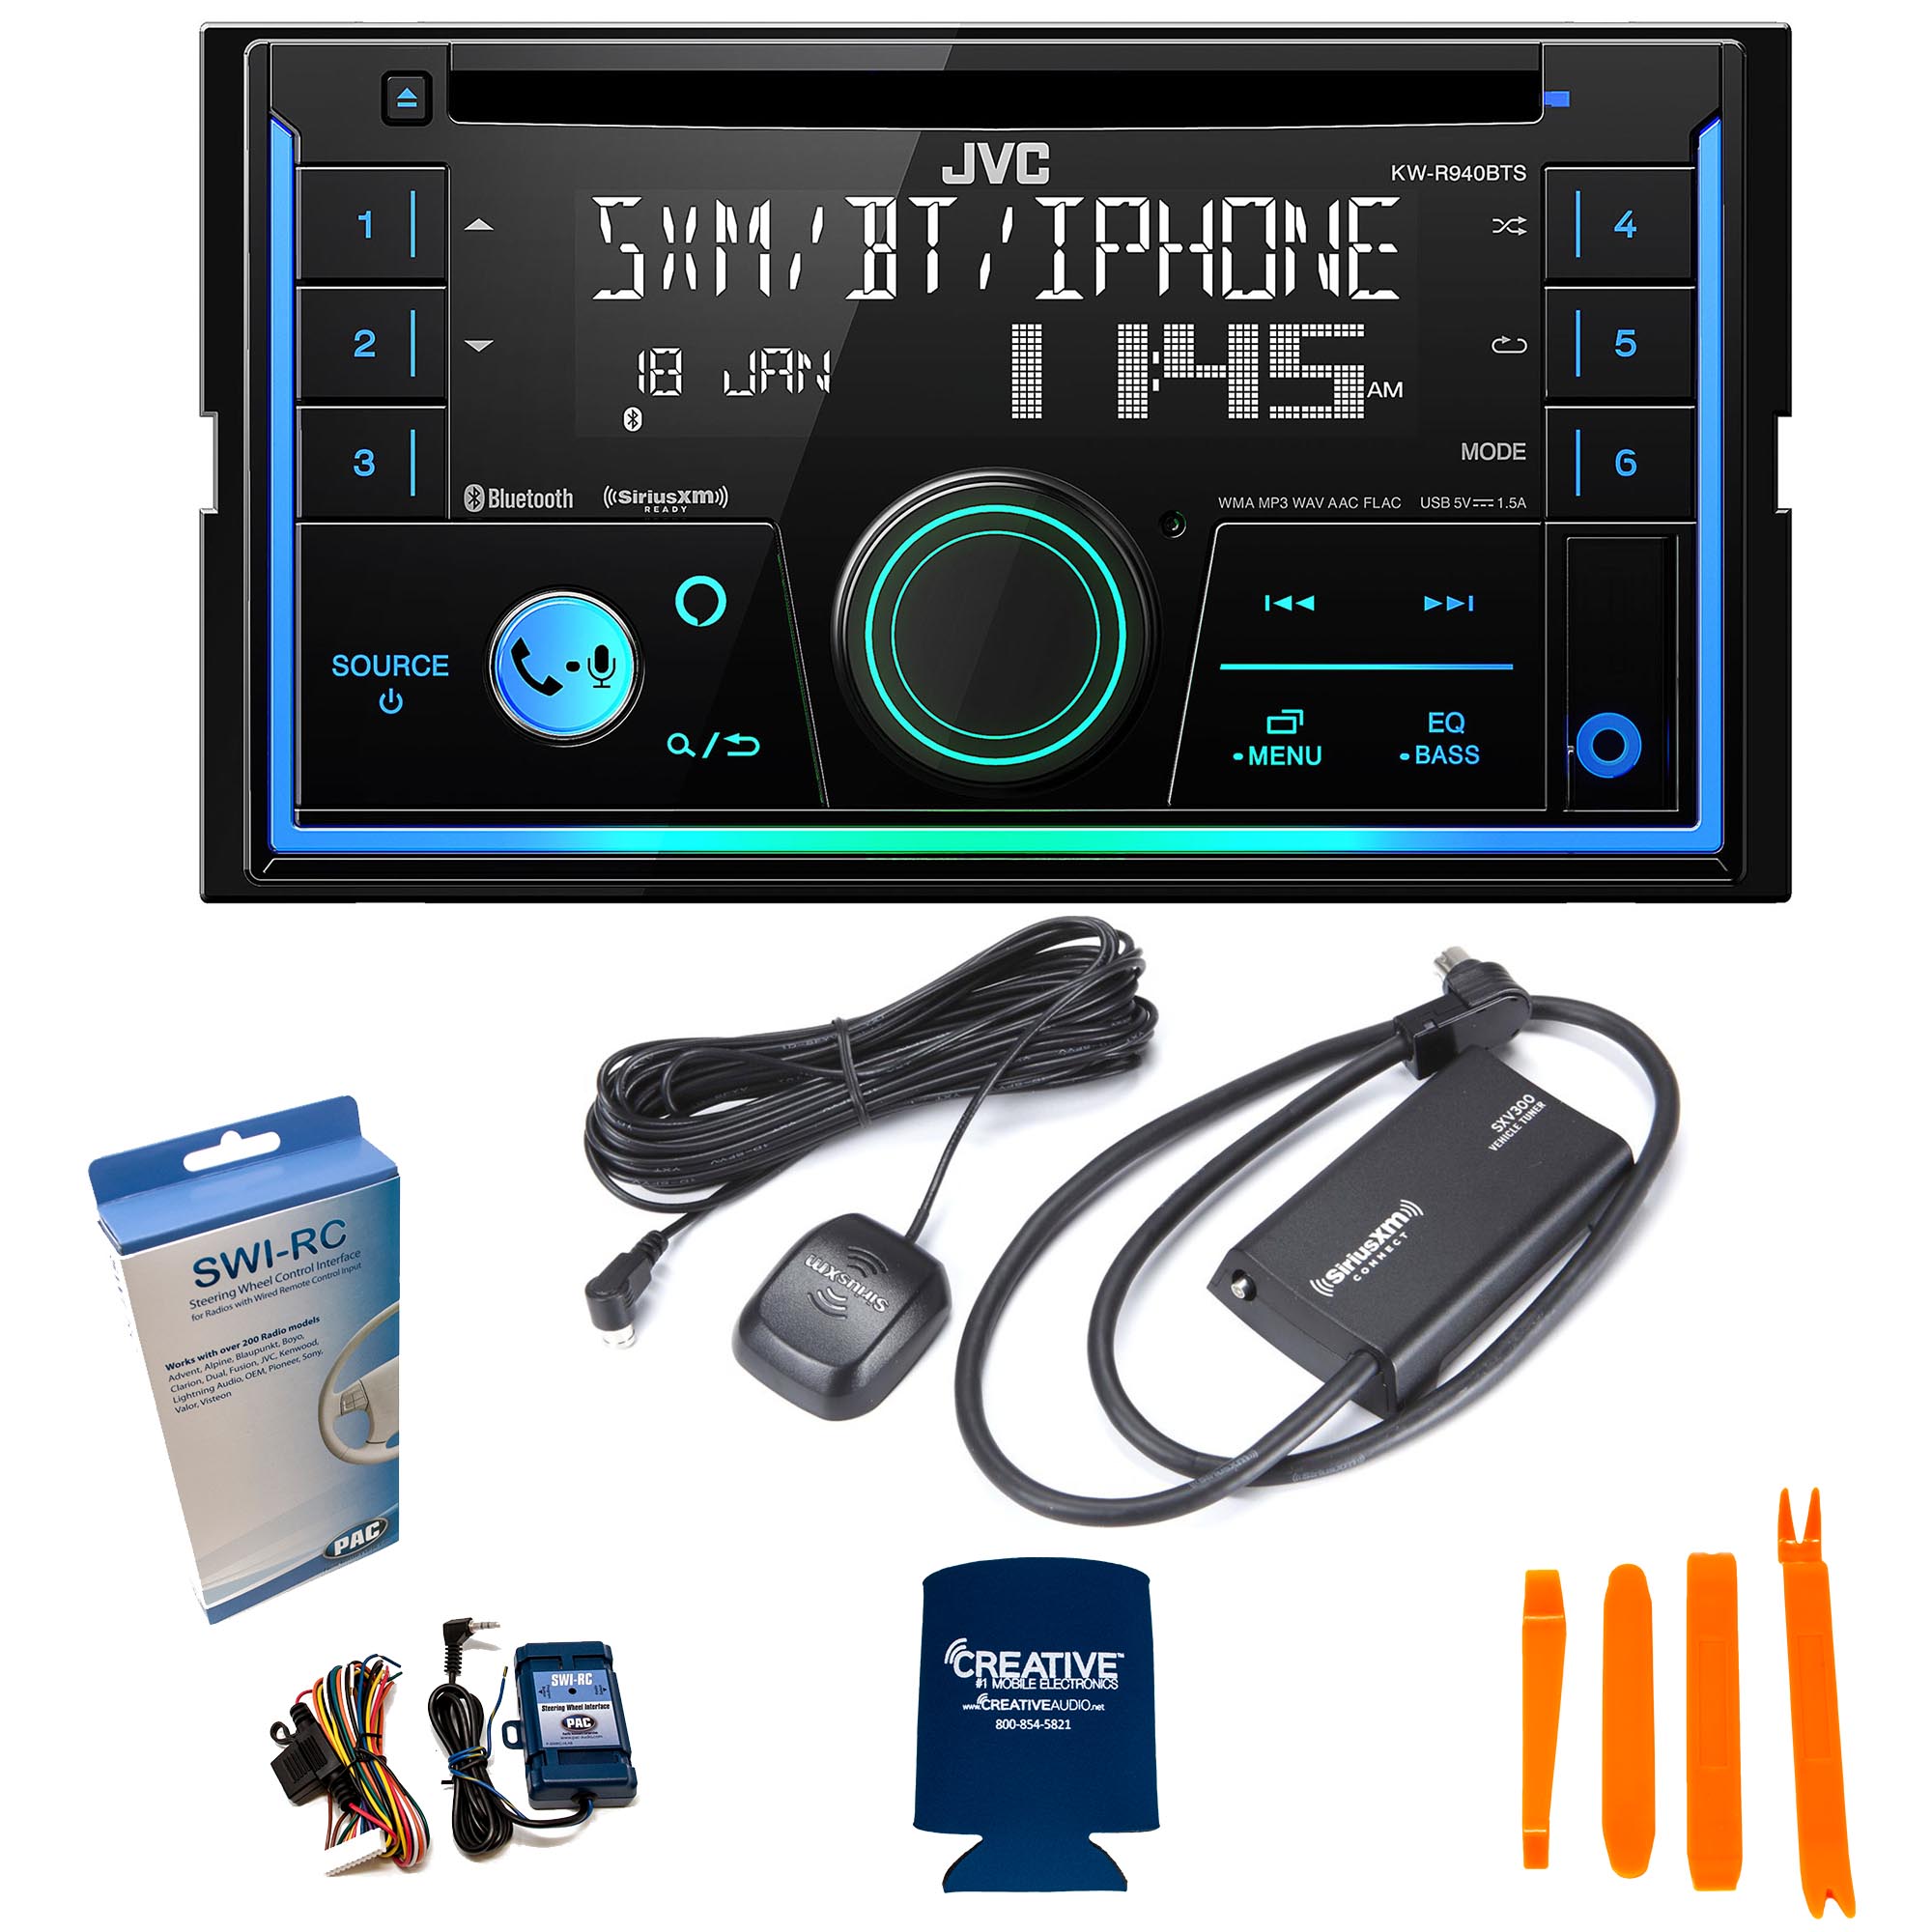 JVC Kenwood JVC KW-R940BTS 2-Din CD Receiver compatible with SXV300 SiriusXM Tuner, Bluetooth, Amazon Alexa and SWI-RC adapter